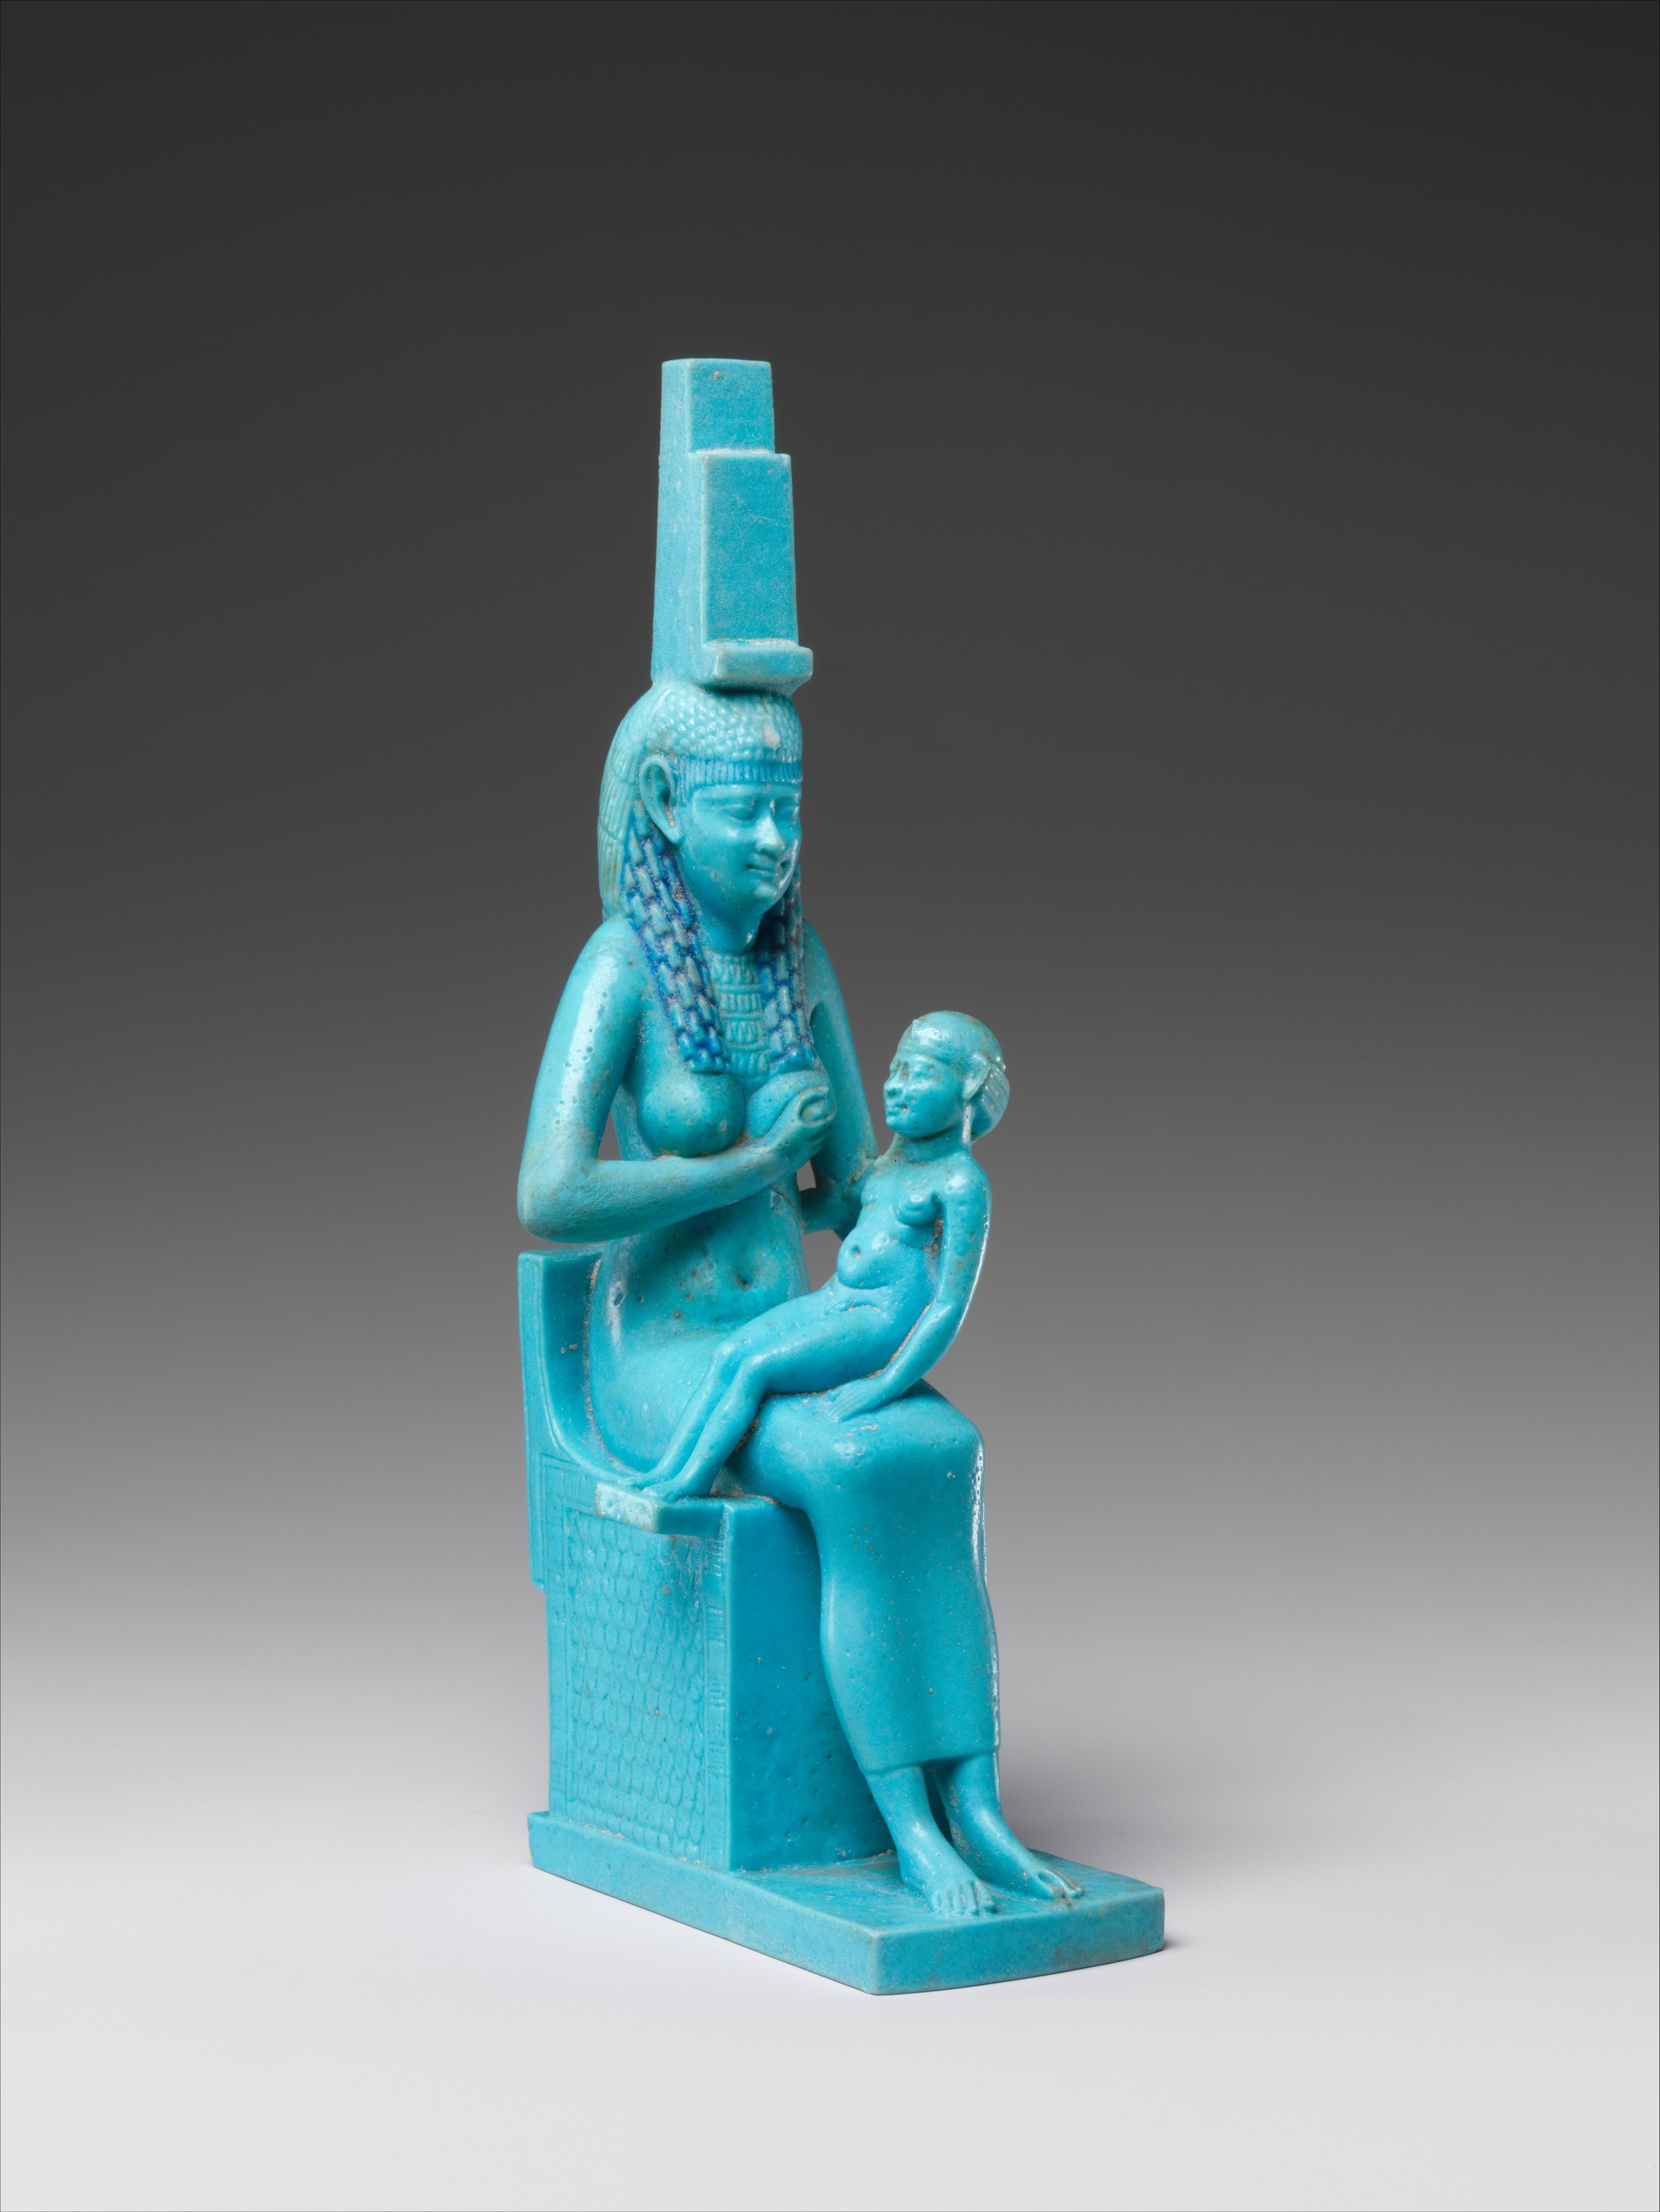 Ancient Egyptian Statue Of Goddess Isis Breastfeeds Her Son Horus Made In Egypt